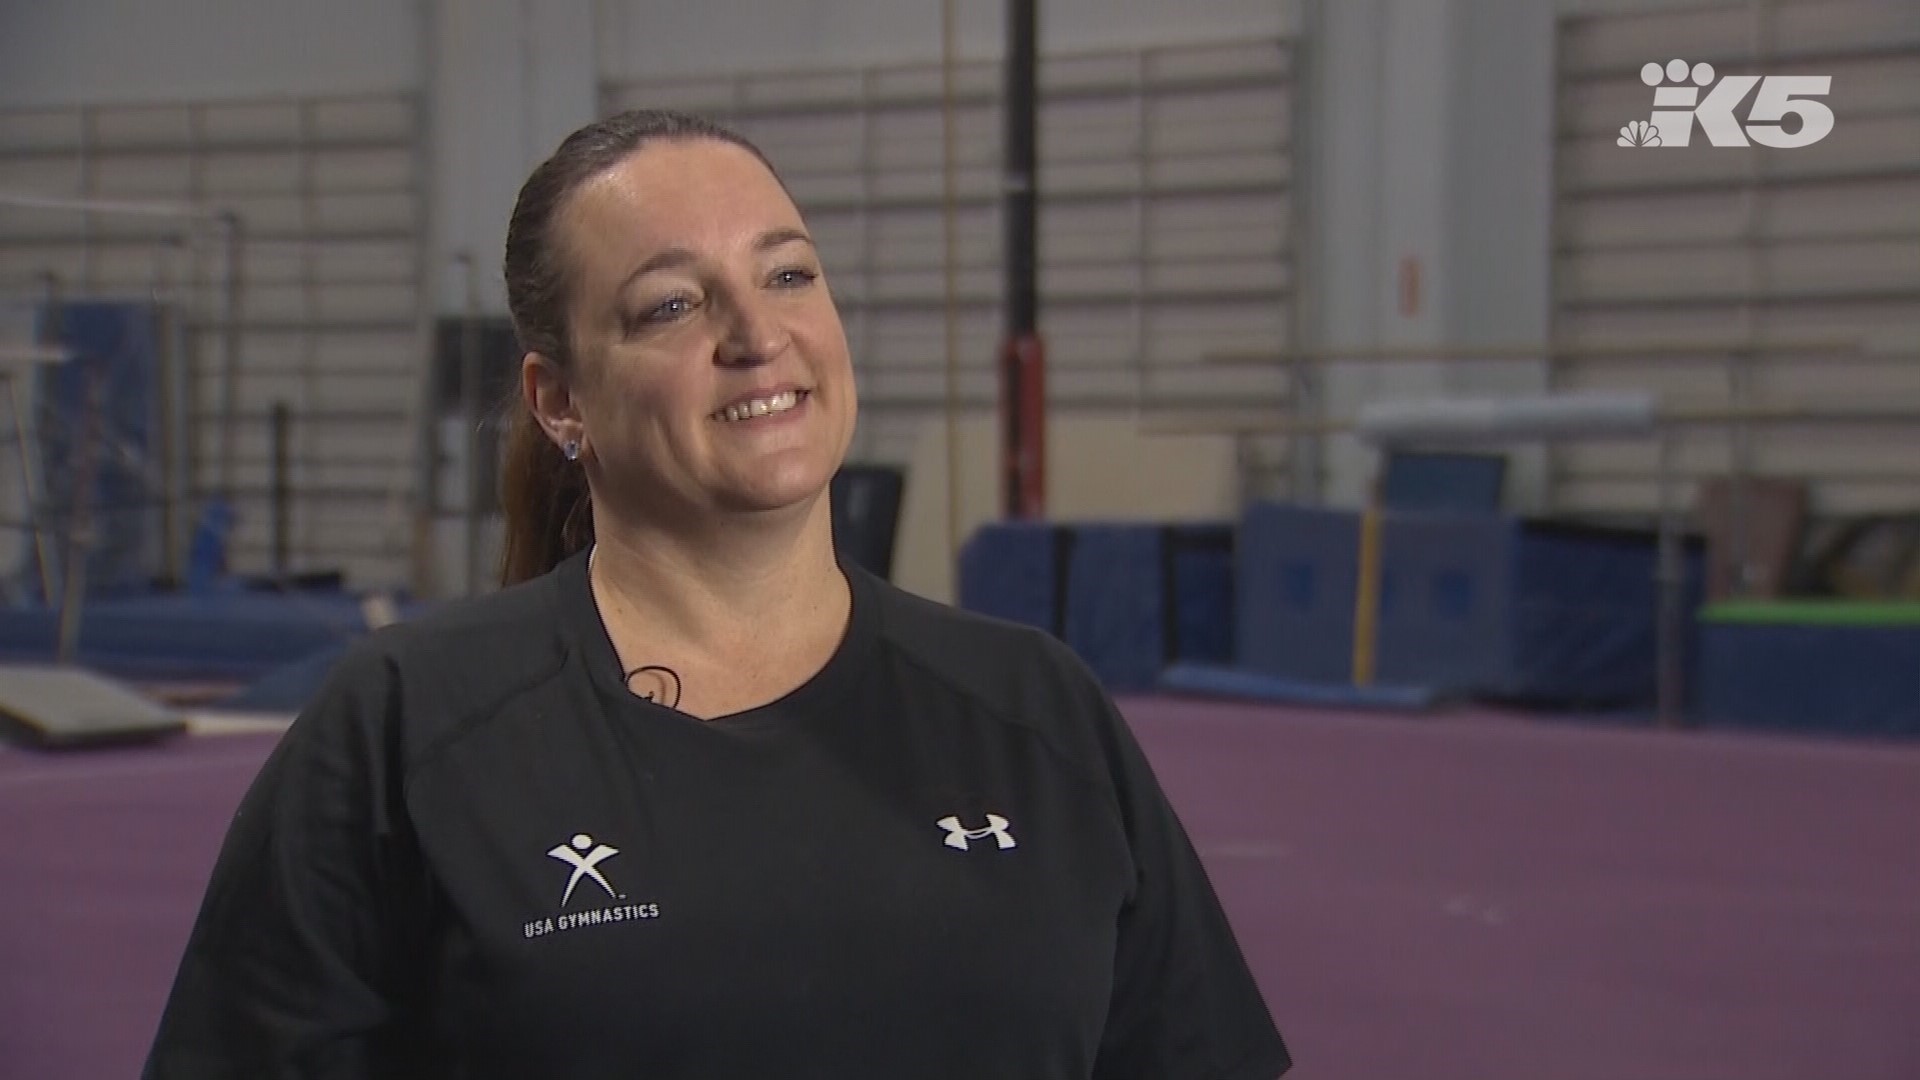 Gymnastics East Owner Kim Thomson, who coached Katelyn Ohashi when she was in elementary school, and gymnastics coach Anne Konen, who has worked with Ohashi in her tots gymnastics classes, react to the UCLA gymnast’s flawless routine.